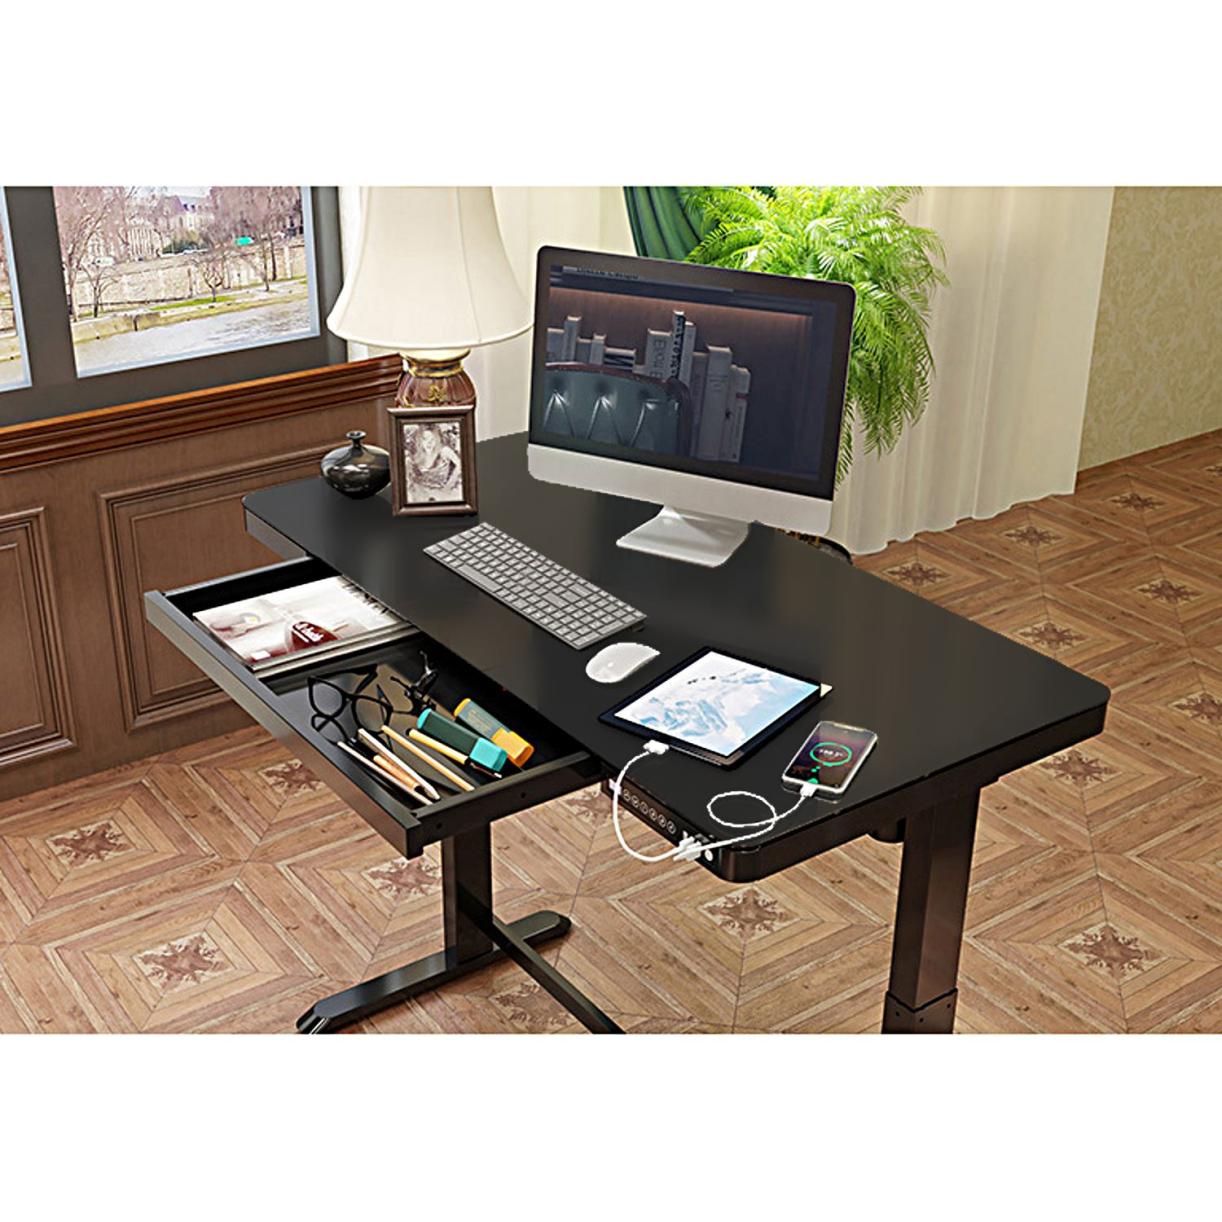 How Do I Choose the Right Electric Height Adjustable Desk for My Needs?